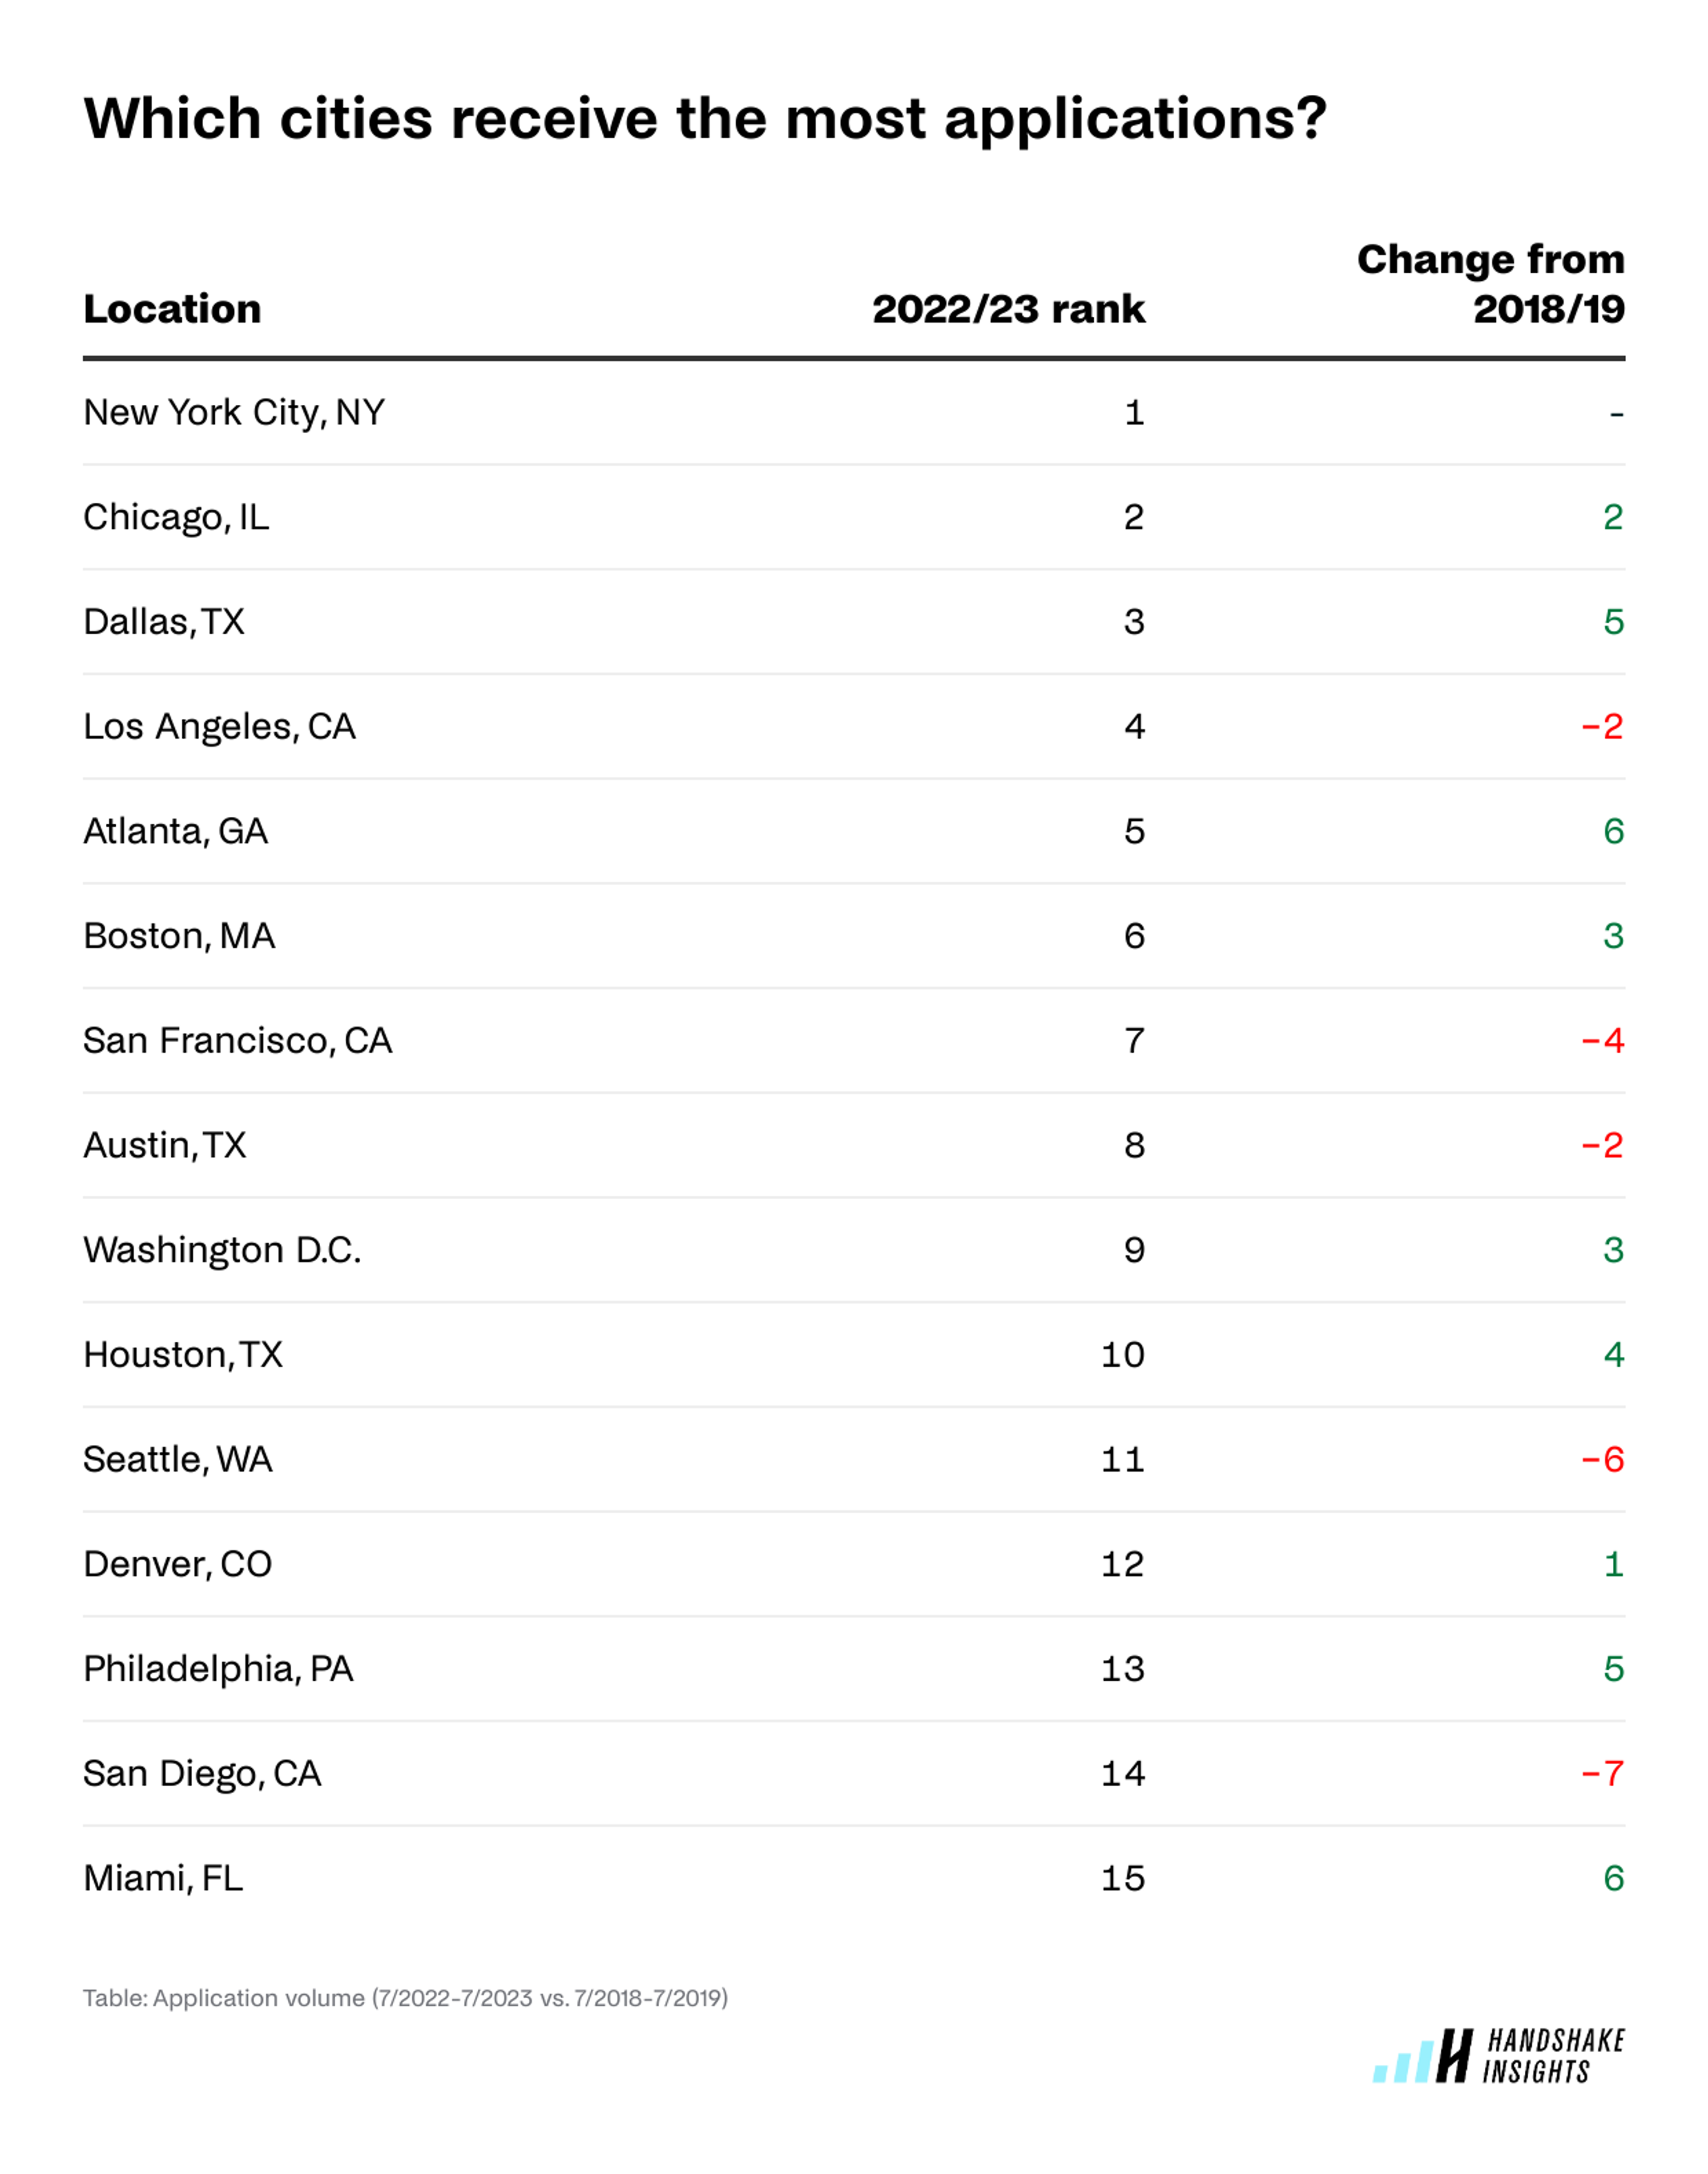 Top 15 cities that receive the most applications from college students and recent grads in the US